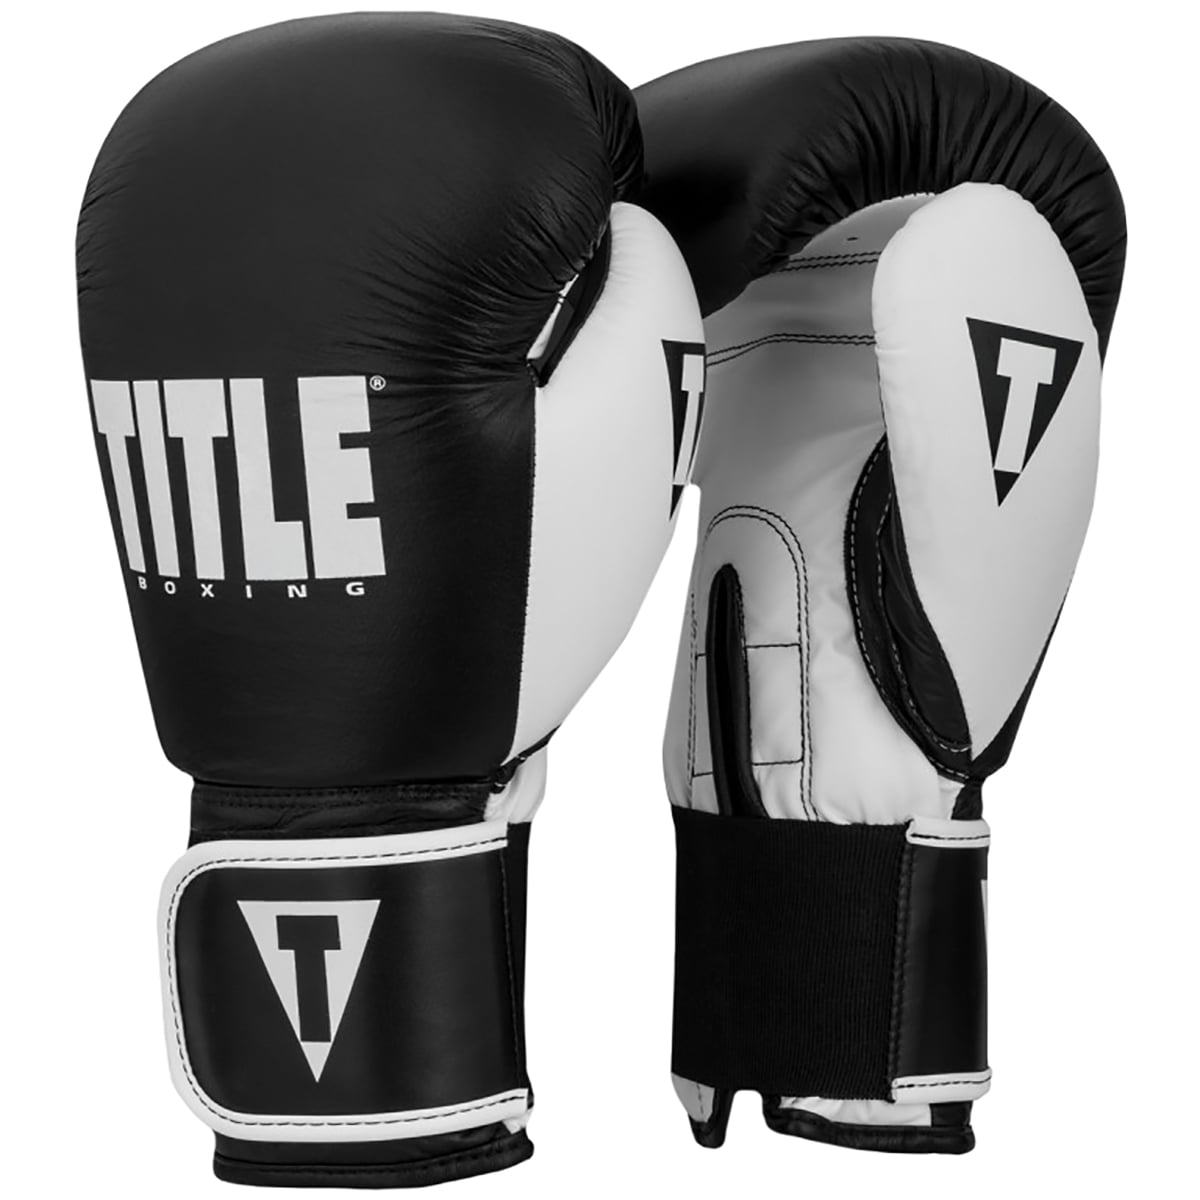 Hook jab and Boxing gloves set of 16 oz gloves and pair hookjab  mma sparing set 